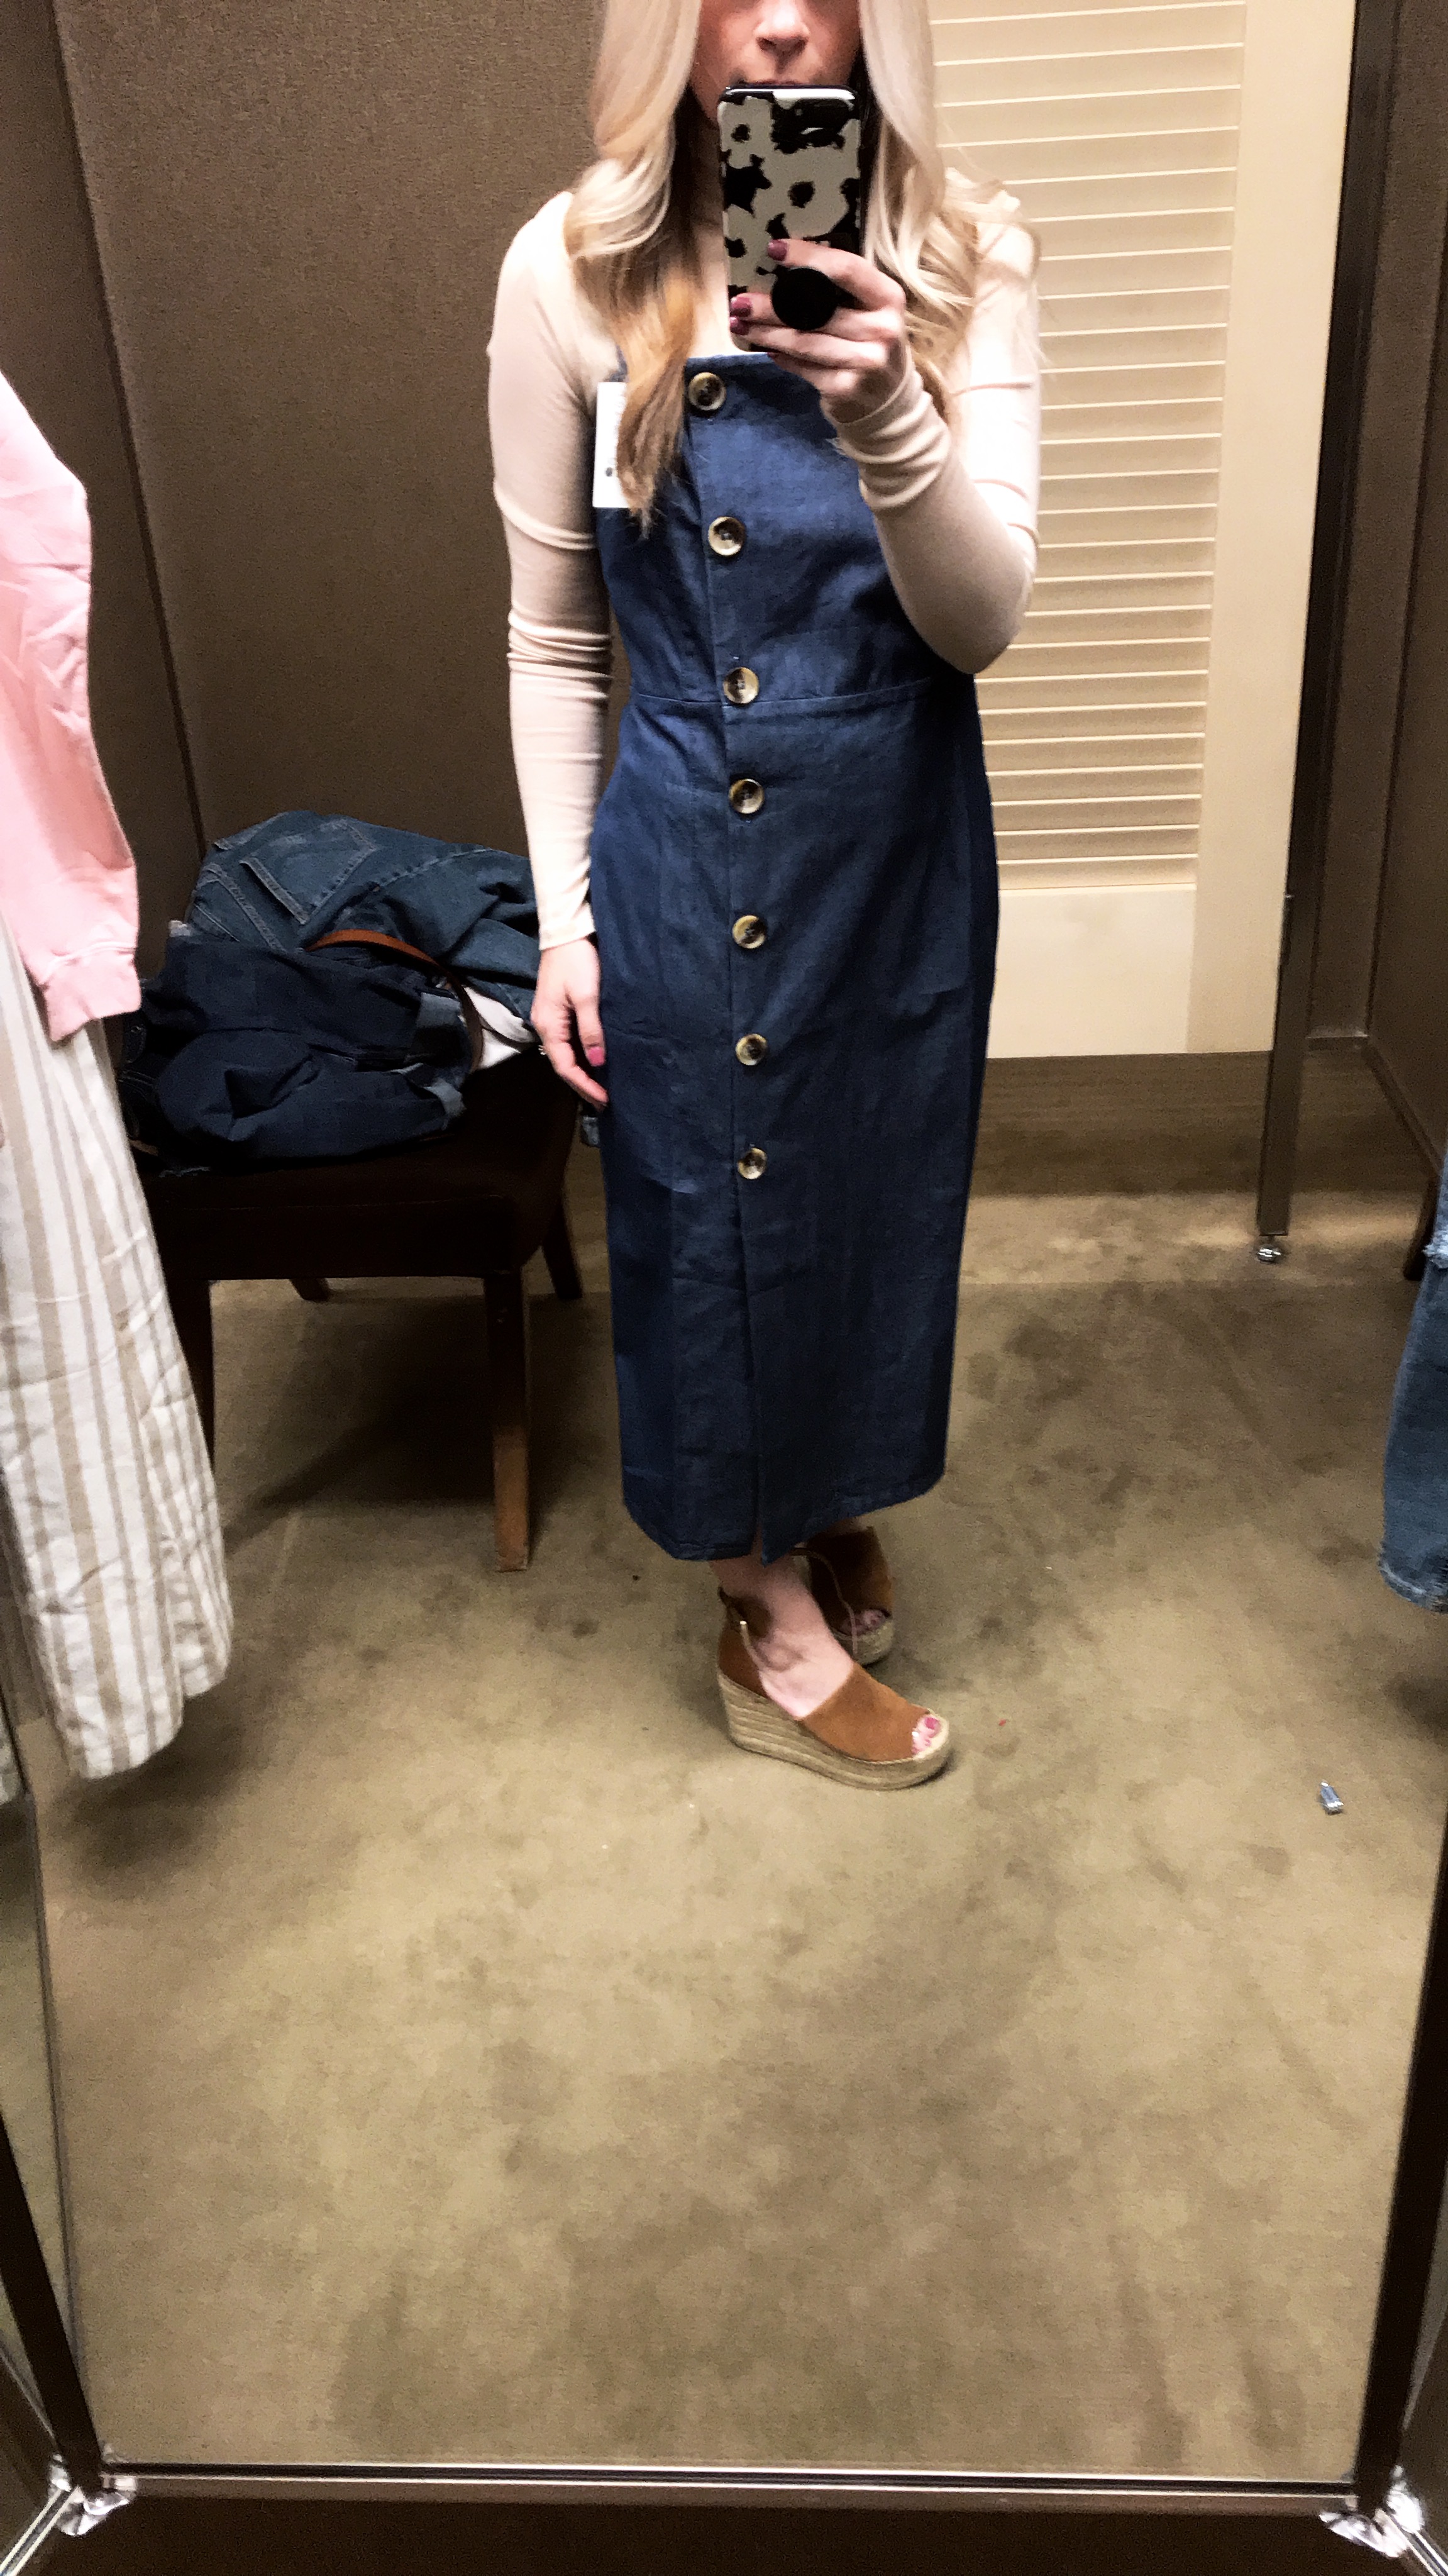 Spring Fashion Nordstrom Try on Sesh by popular Las Vegas style bloggers Life of a Sister